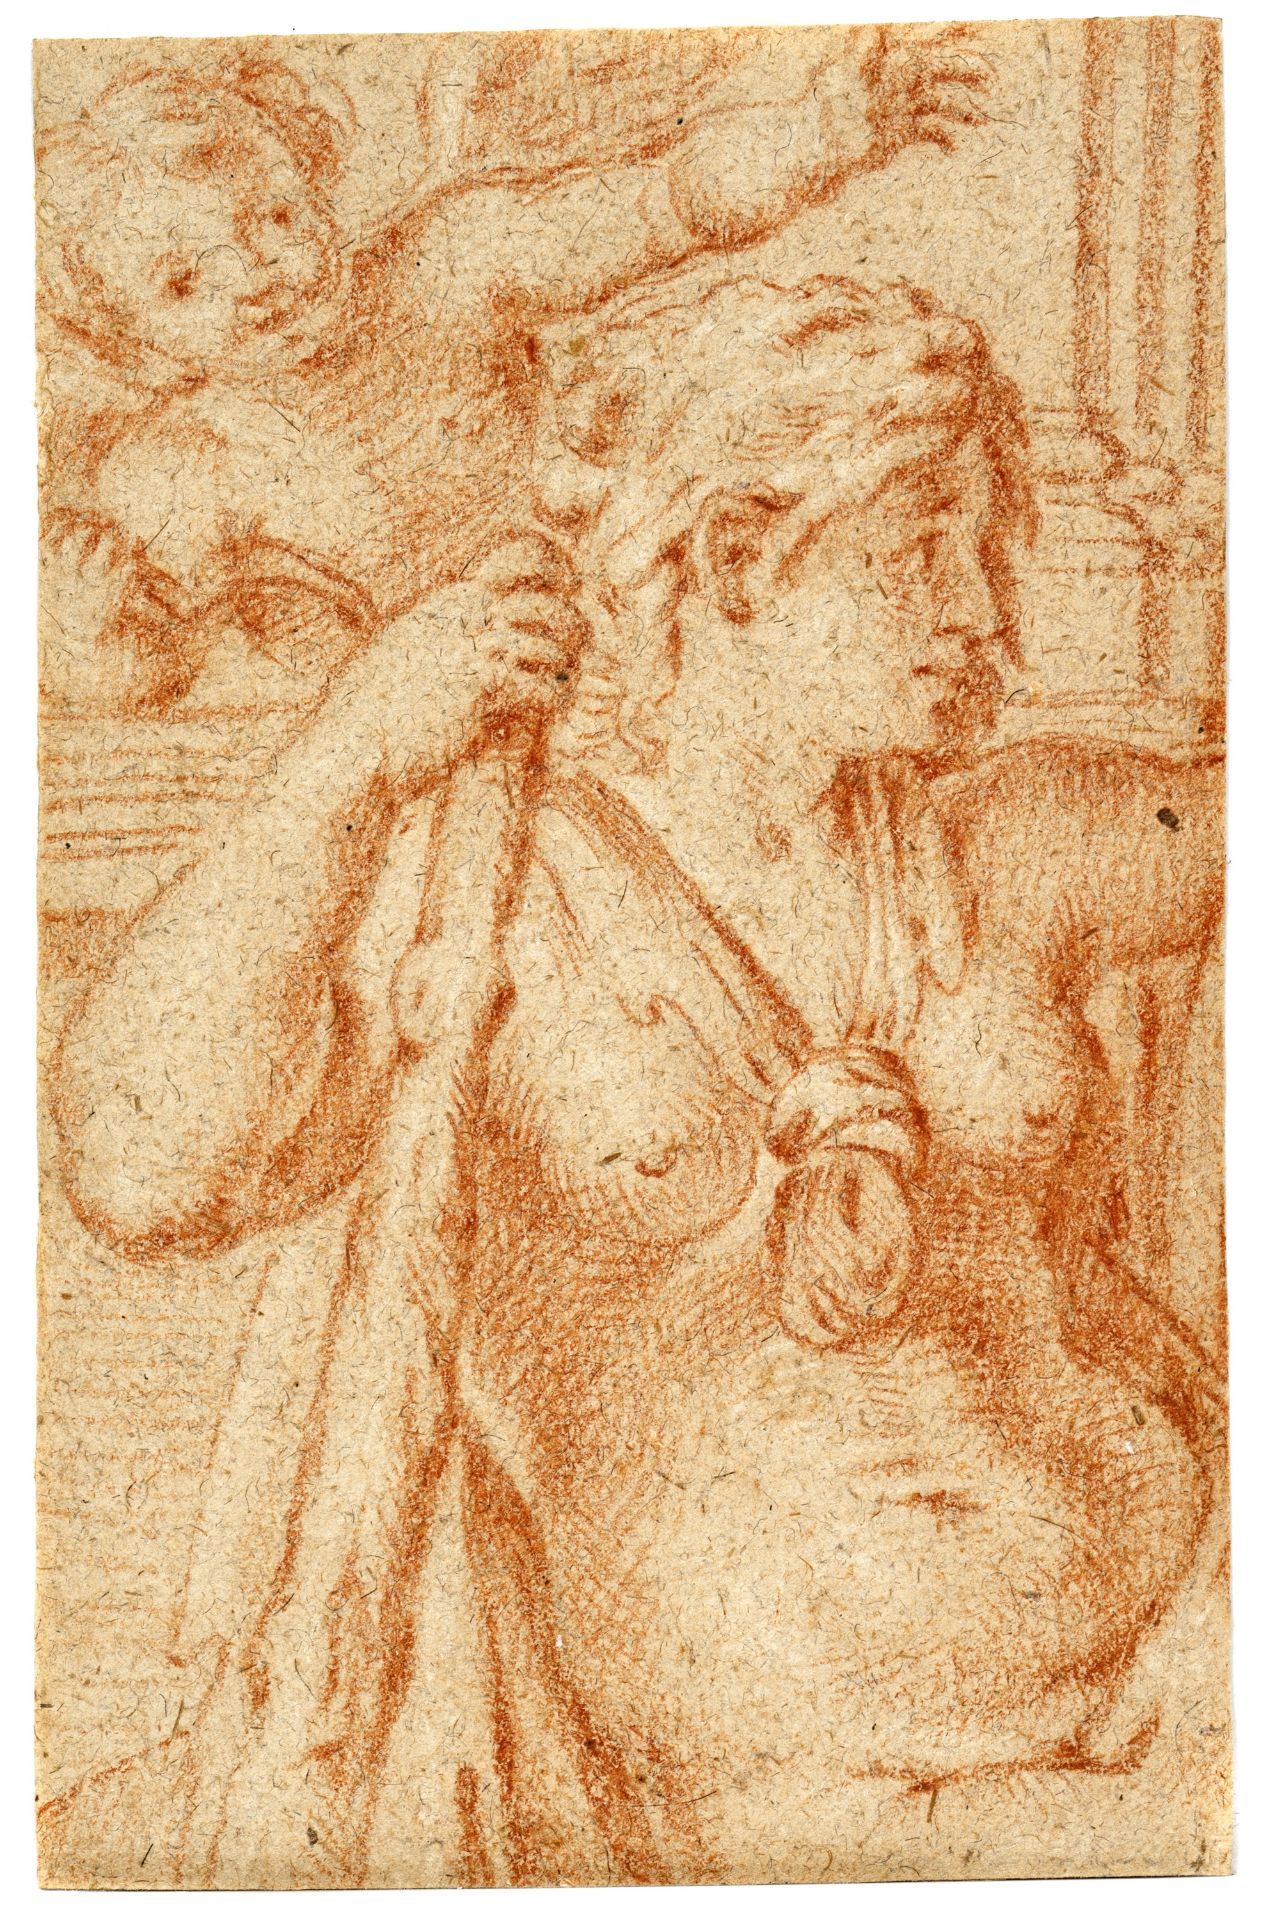 Annibale Carracci (nach), Omphale. Wohl Anfang / Mitte 17. Jh.